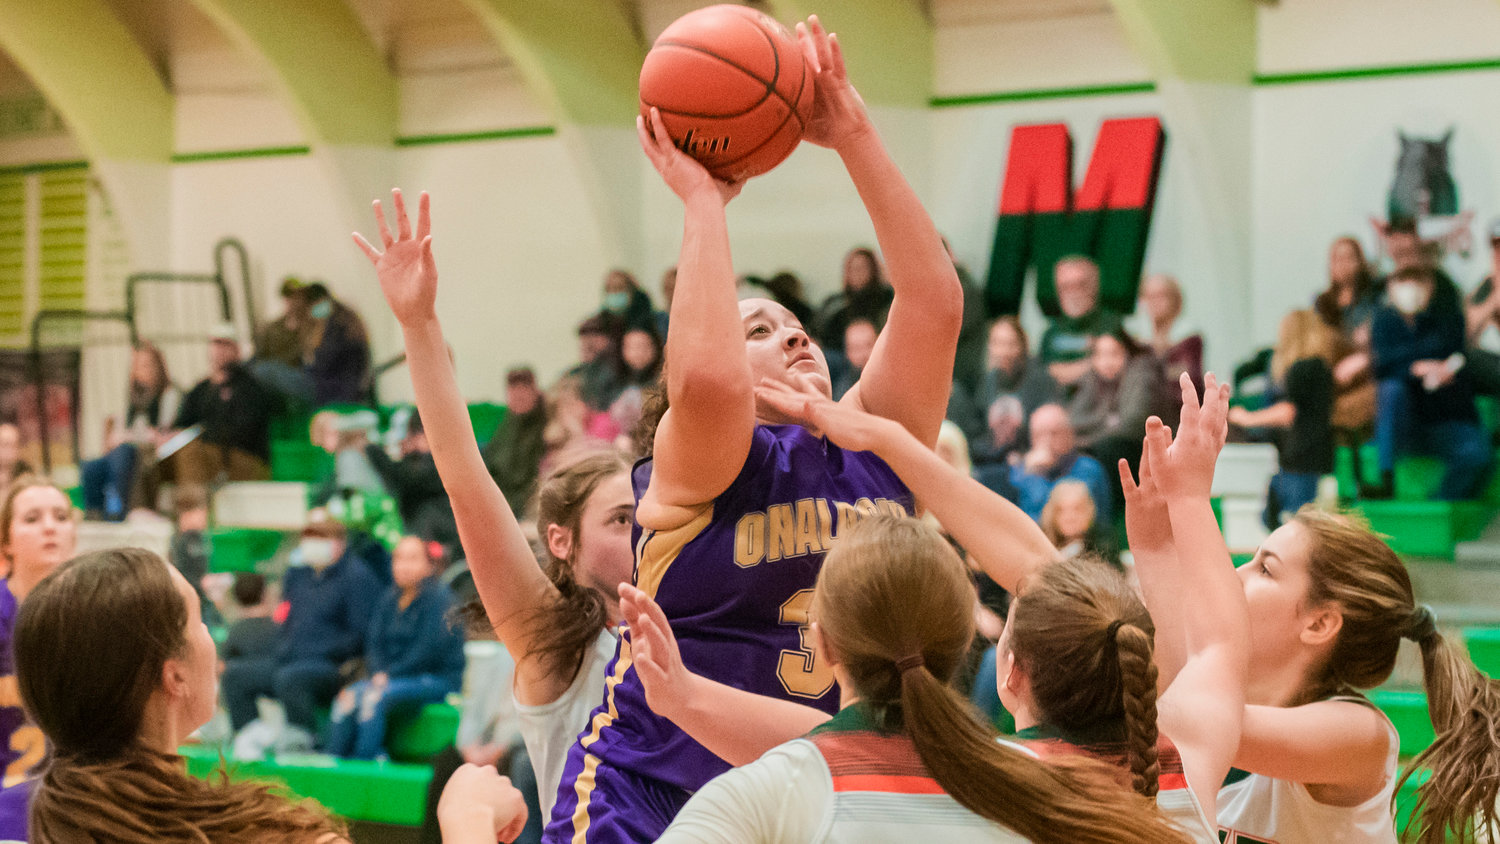 Onalaska’s Alex Cleveland-Barrera (31) shoots over Timberwolves during a game Saturday night in Morton.